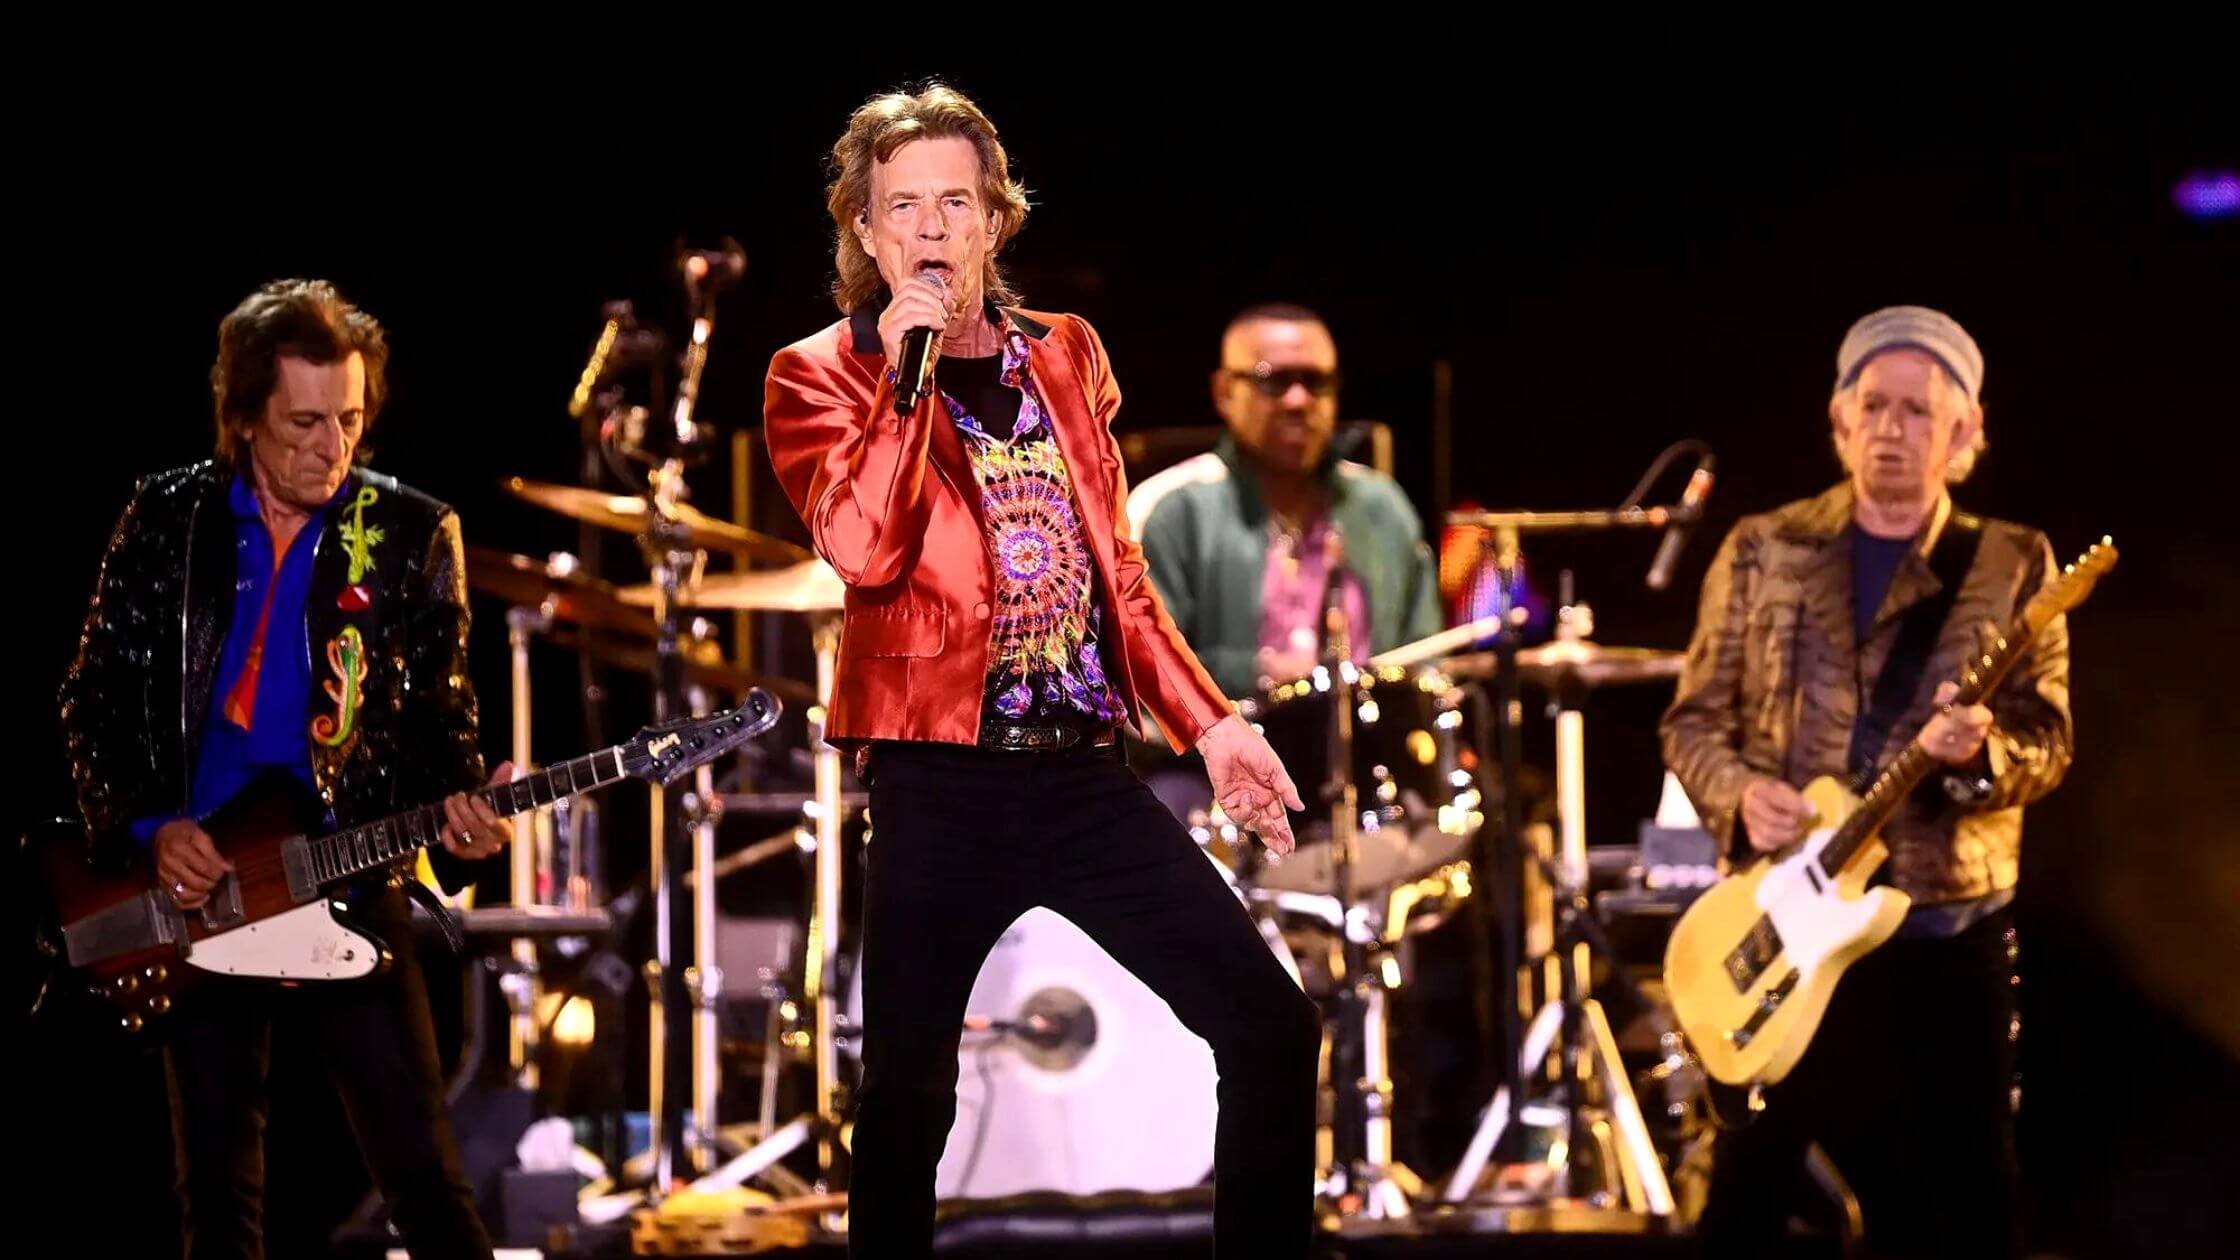 The Rolling Stones Perform An Old Song To Start Their European Tour